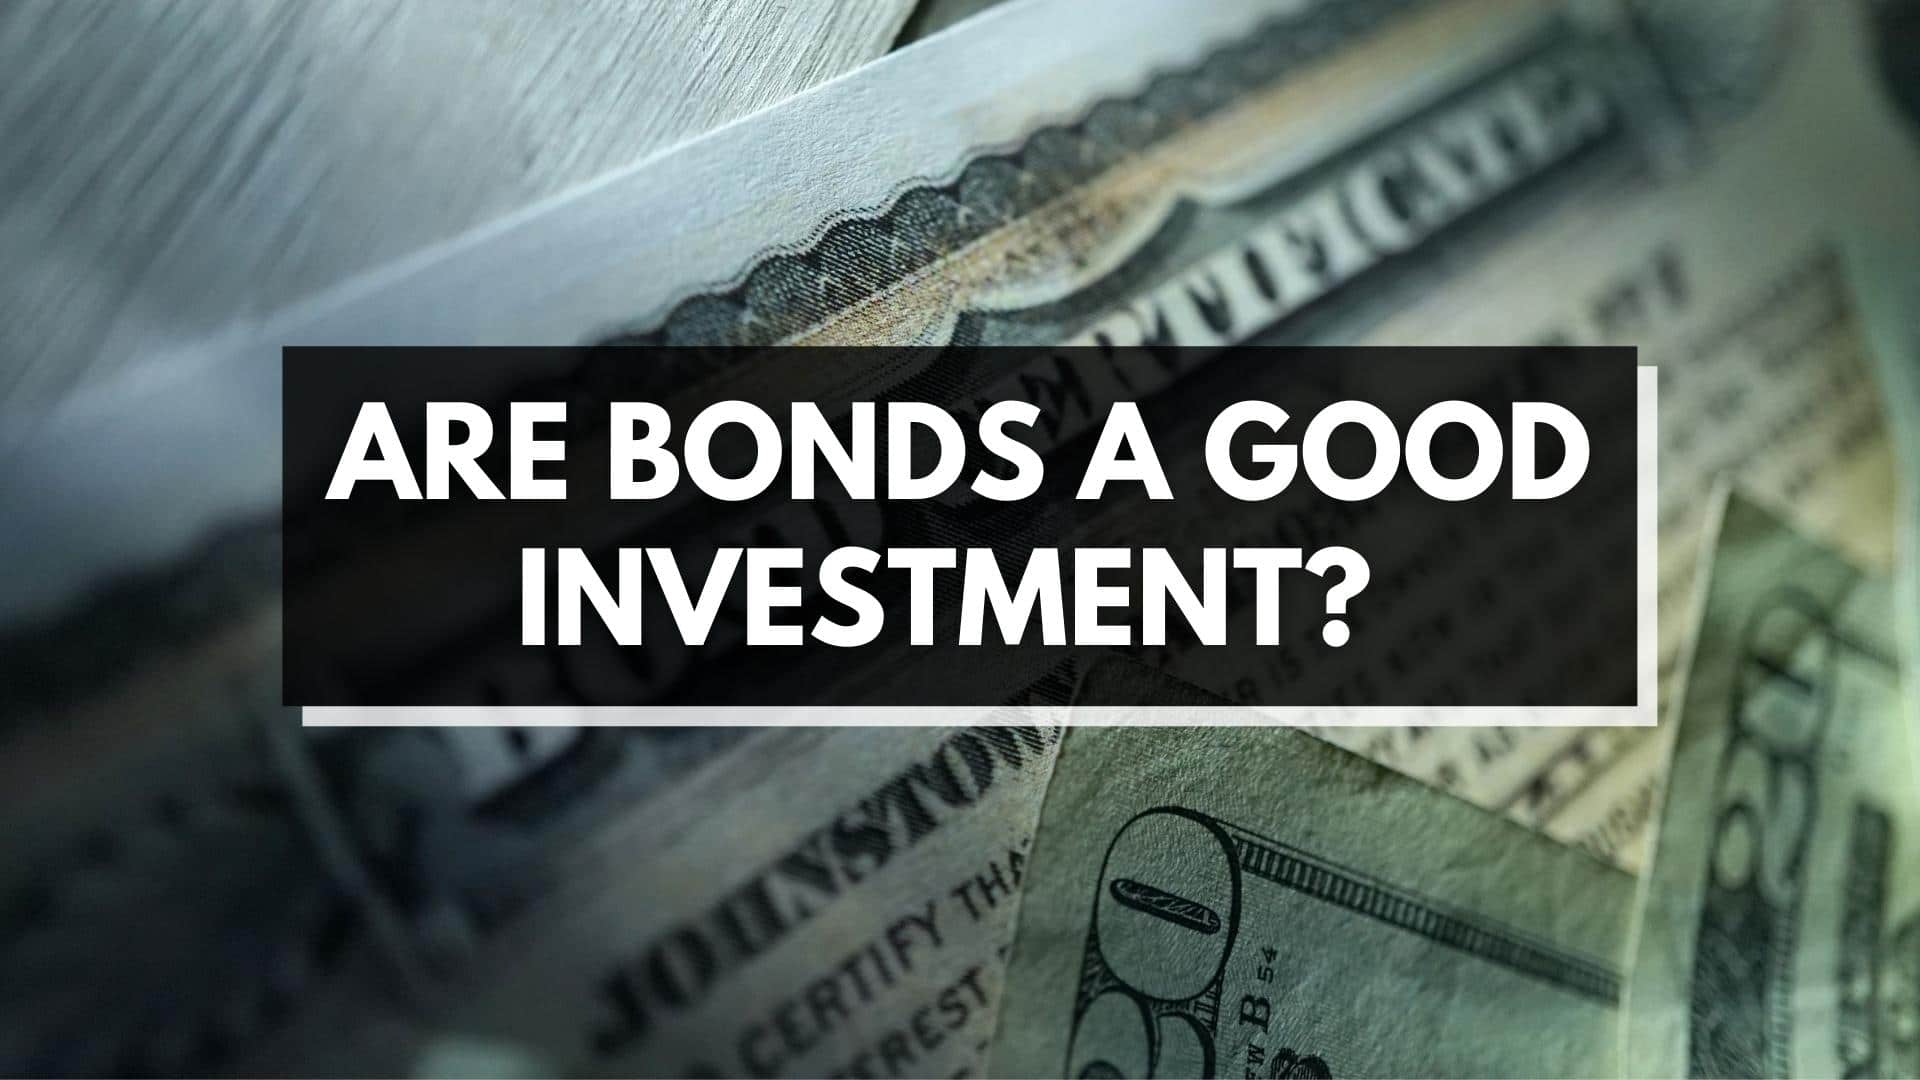 Why Are Bonds Good Investments